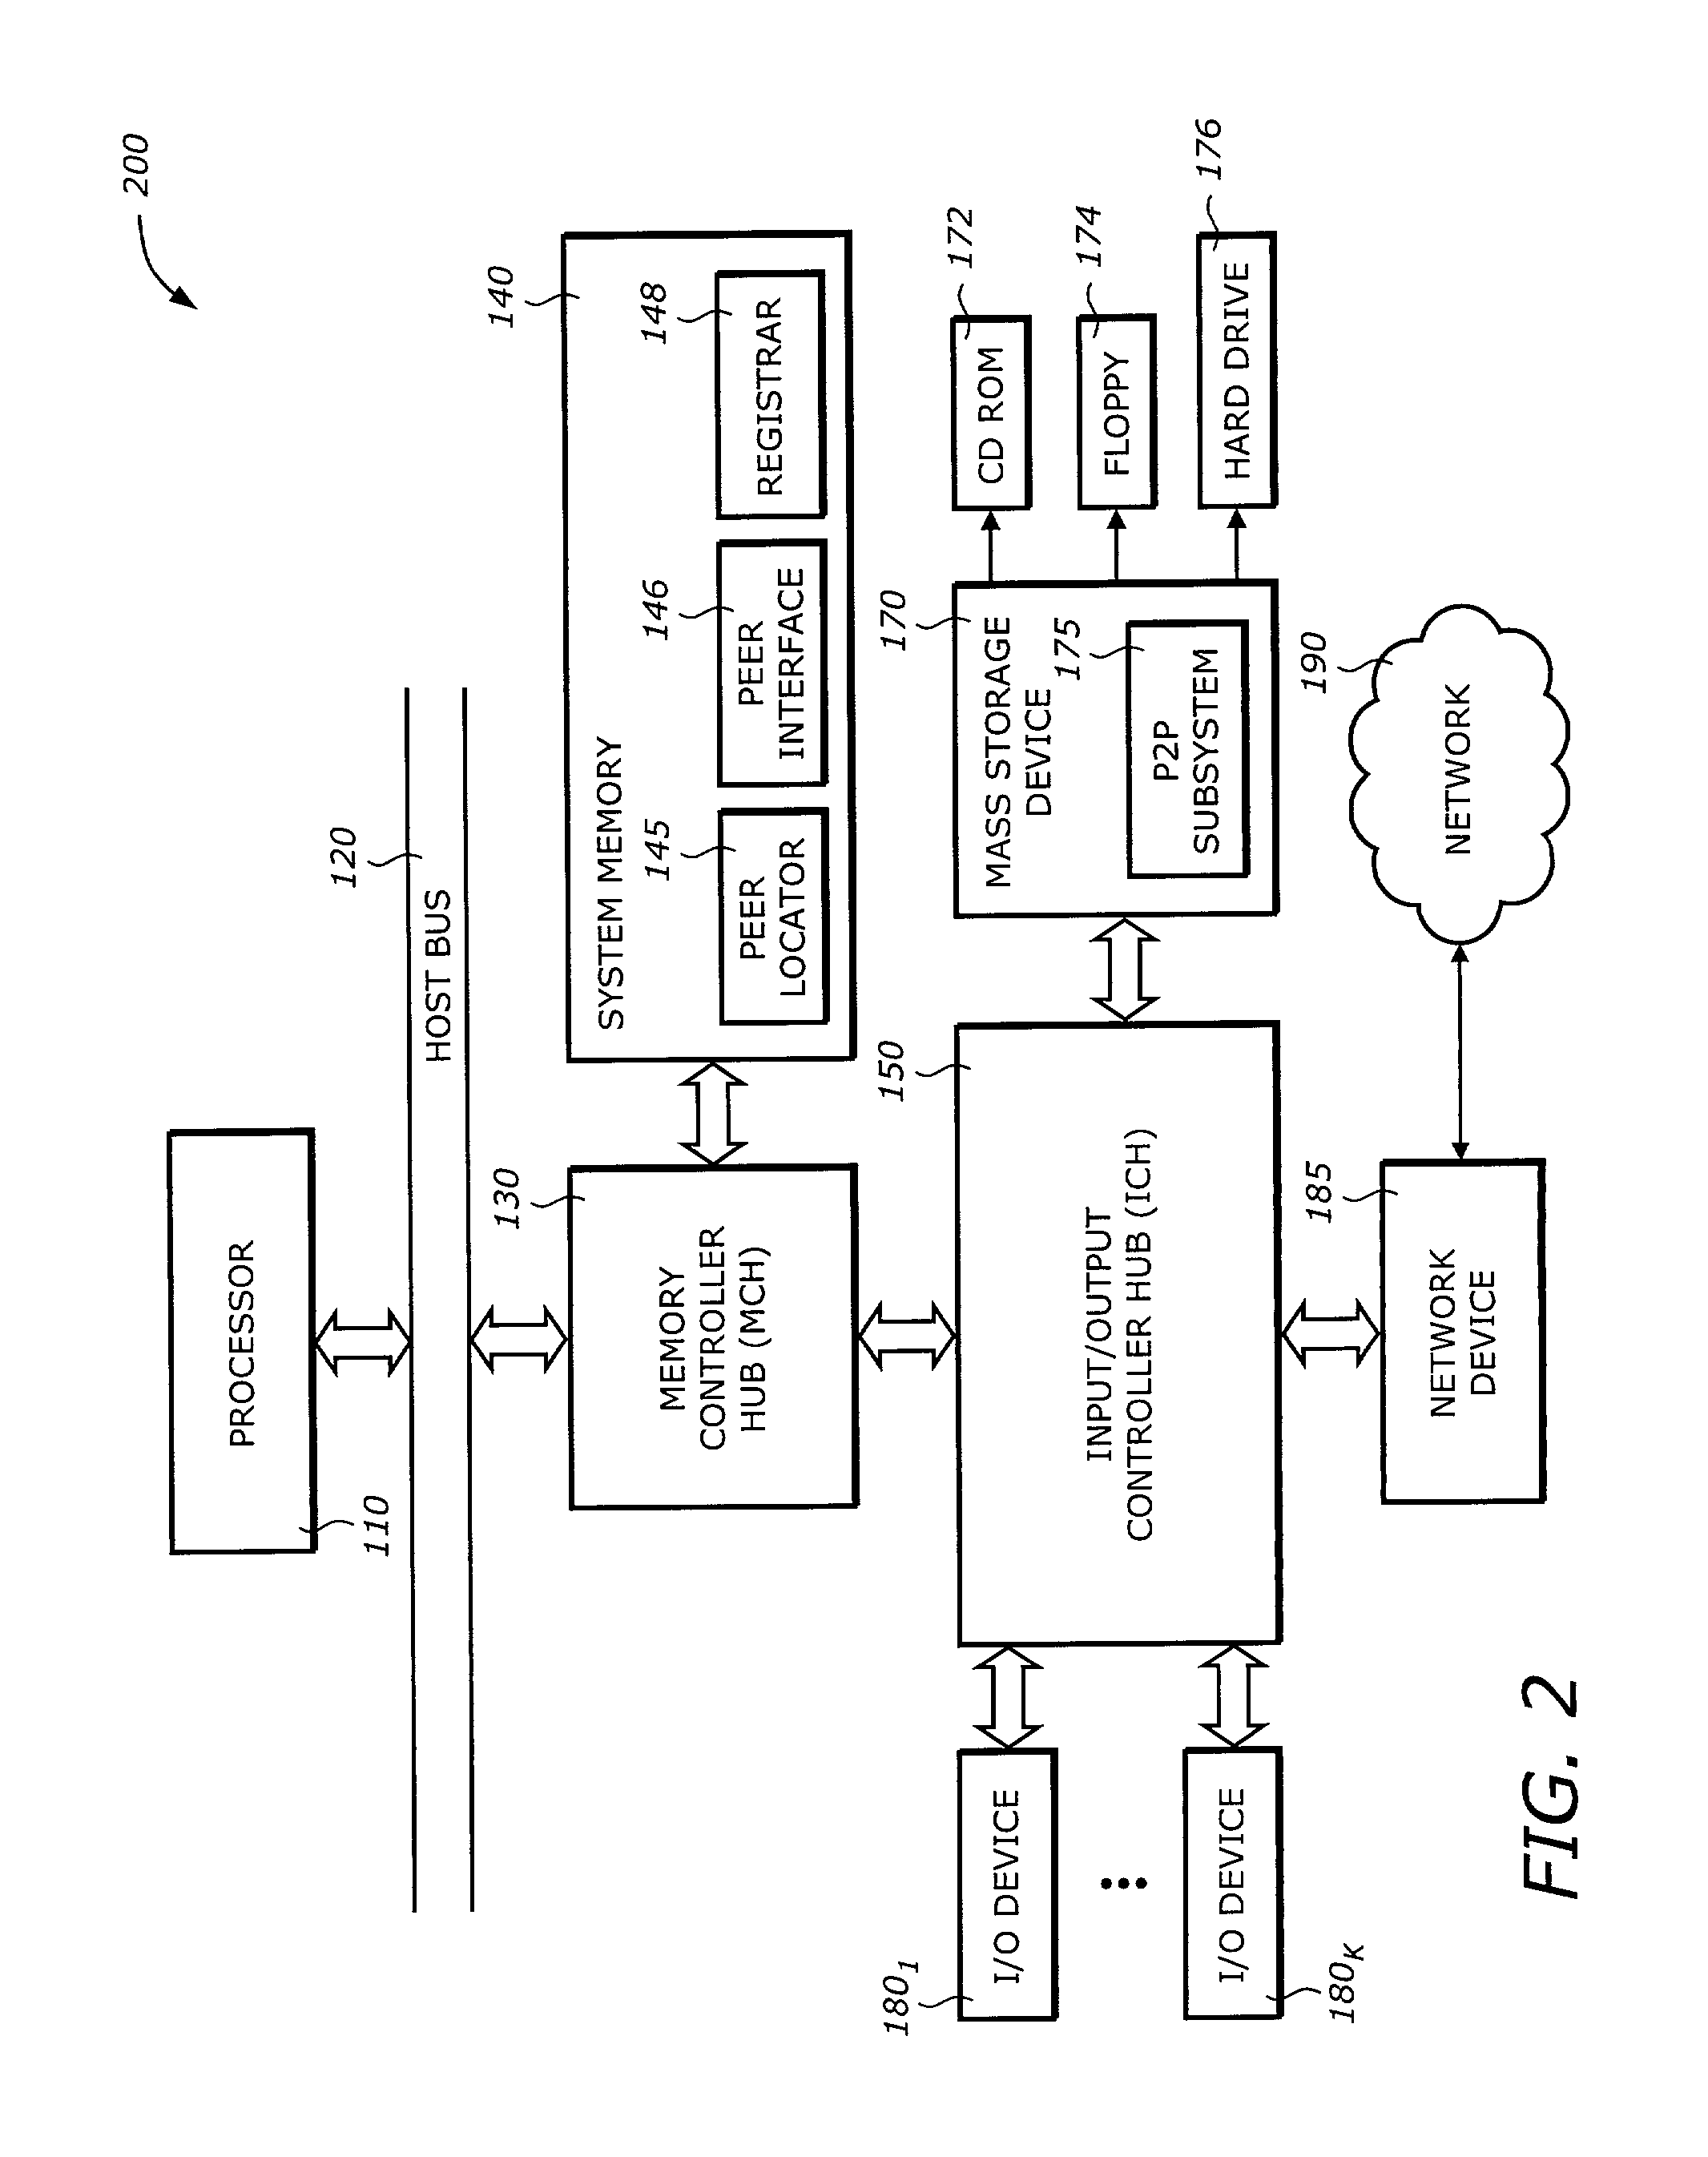 Multi-level ring peer-to-peer network structure for peer and object discovery